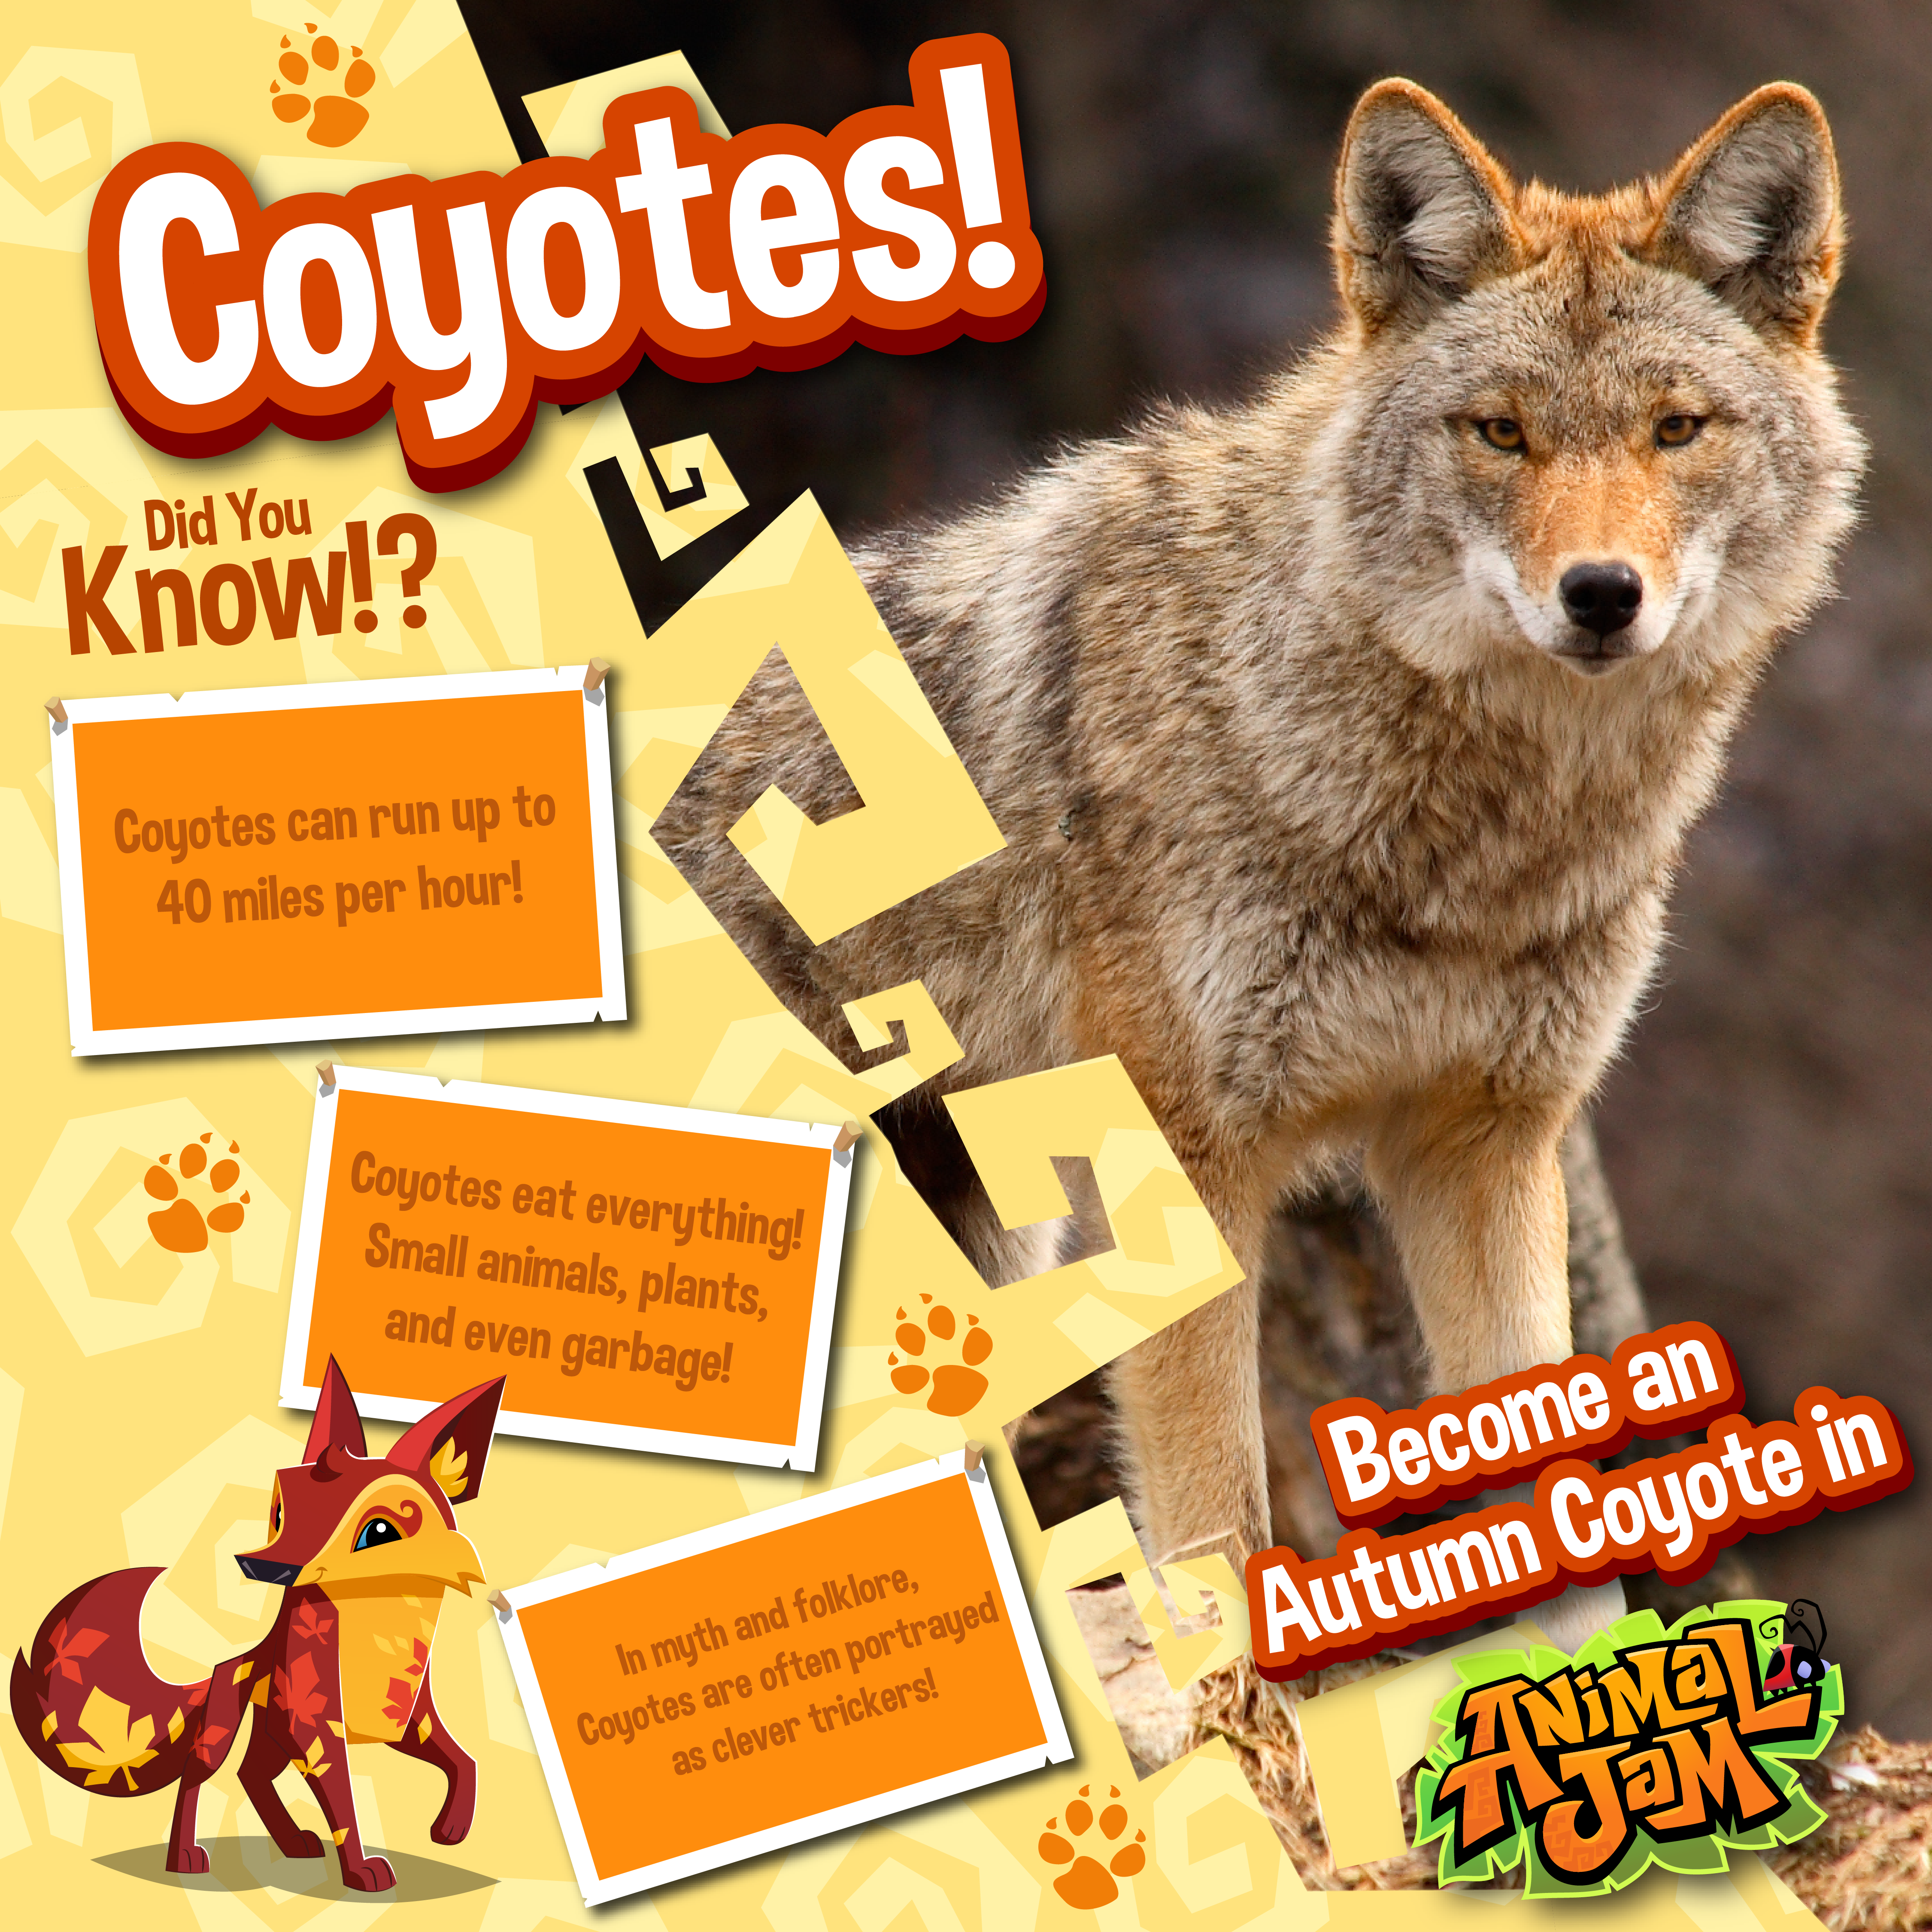 Coyotes! Did you know? - The Daily Explorer